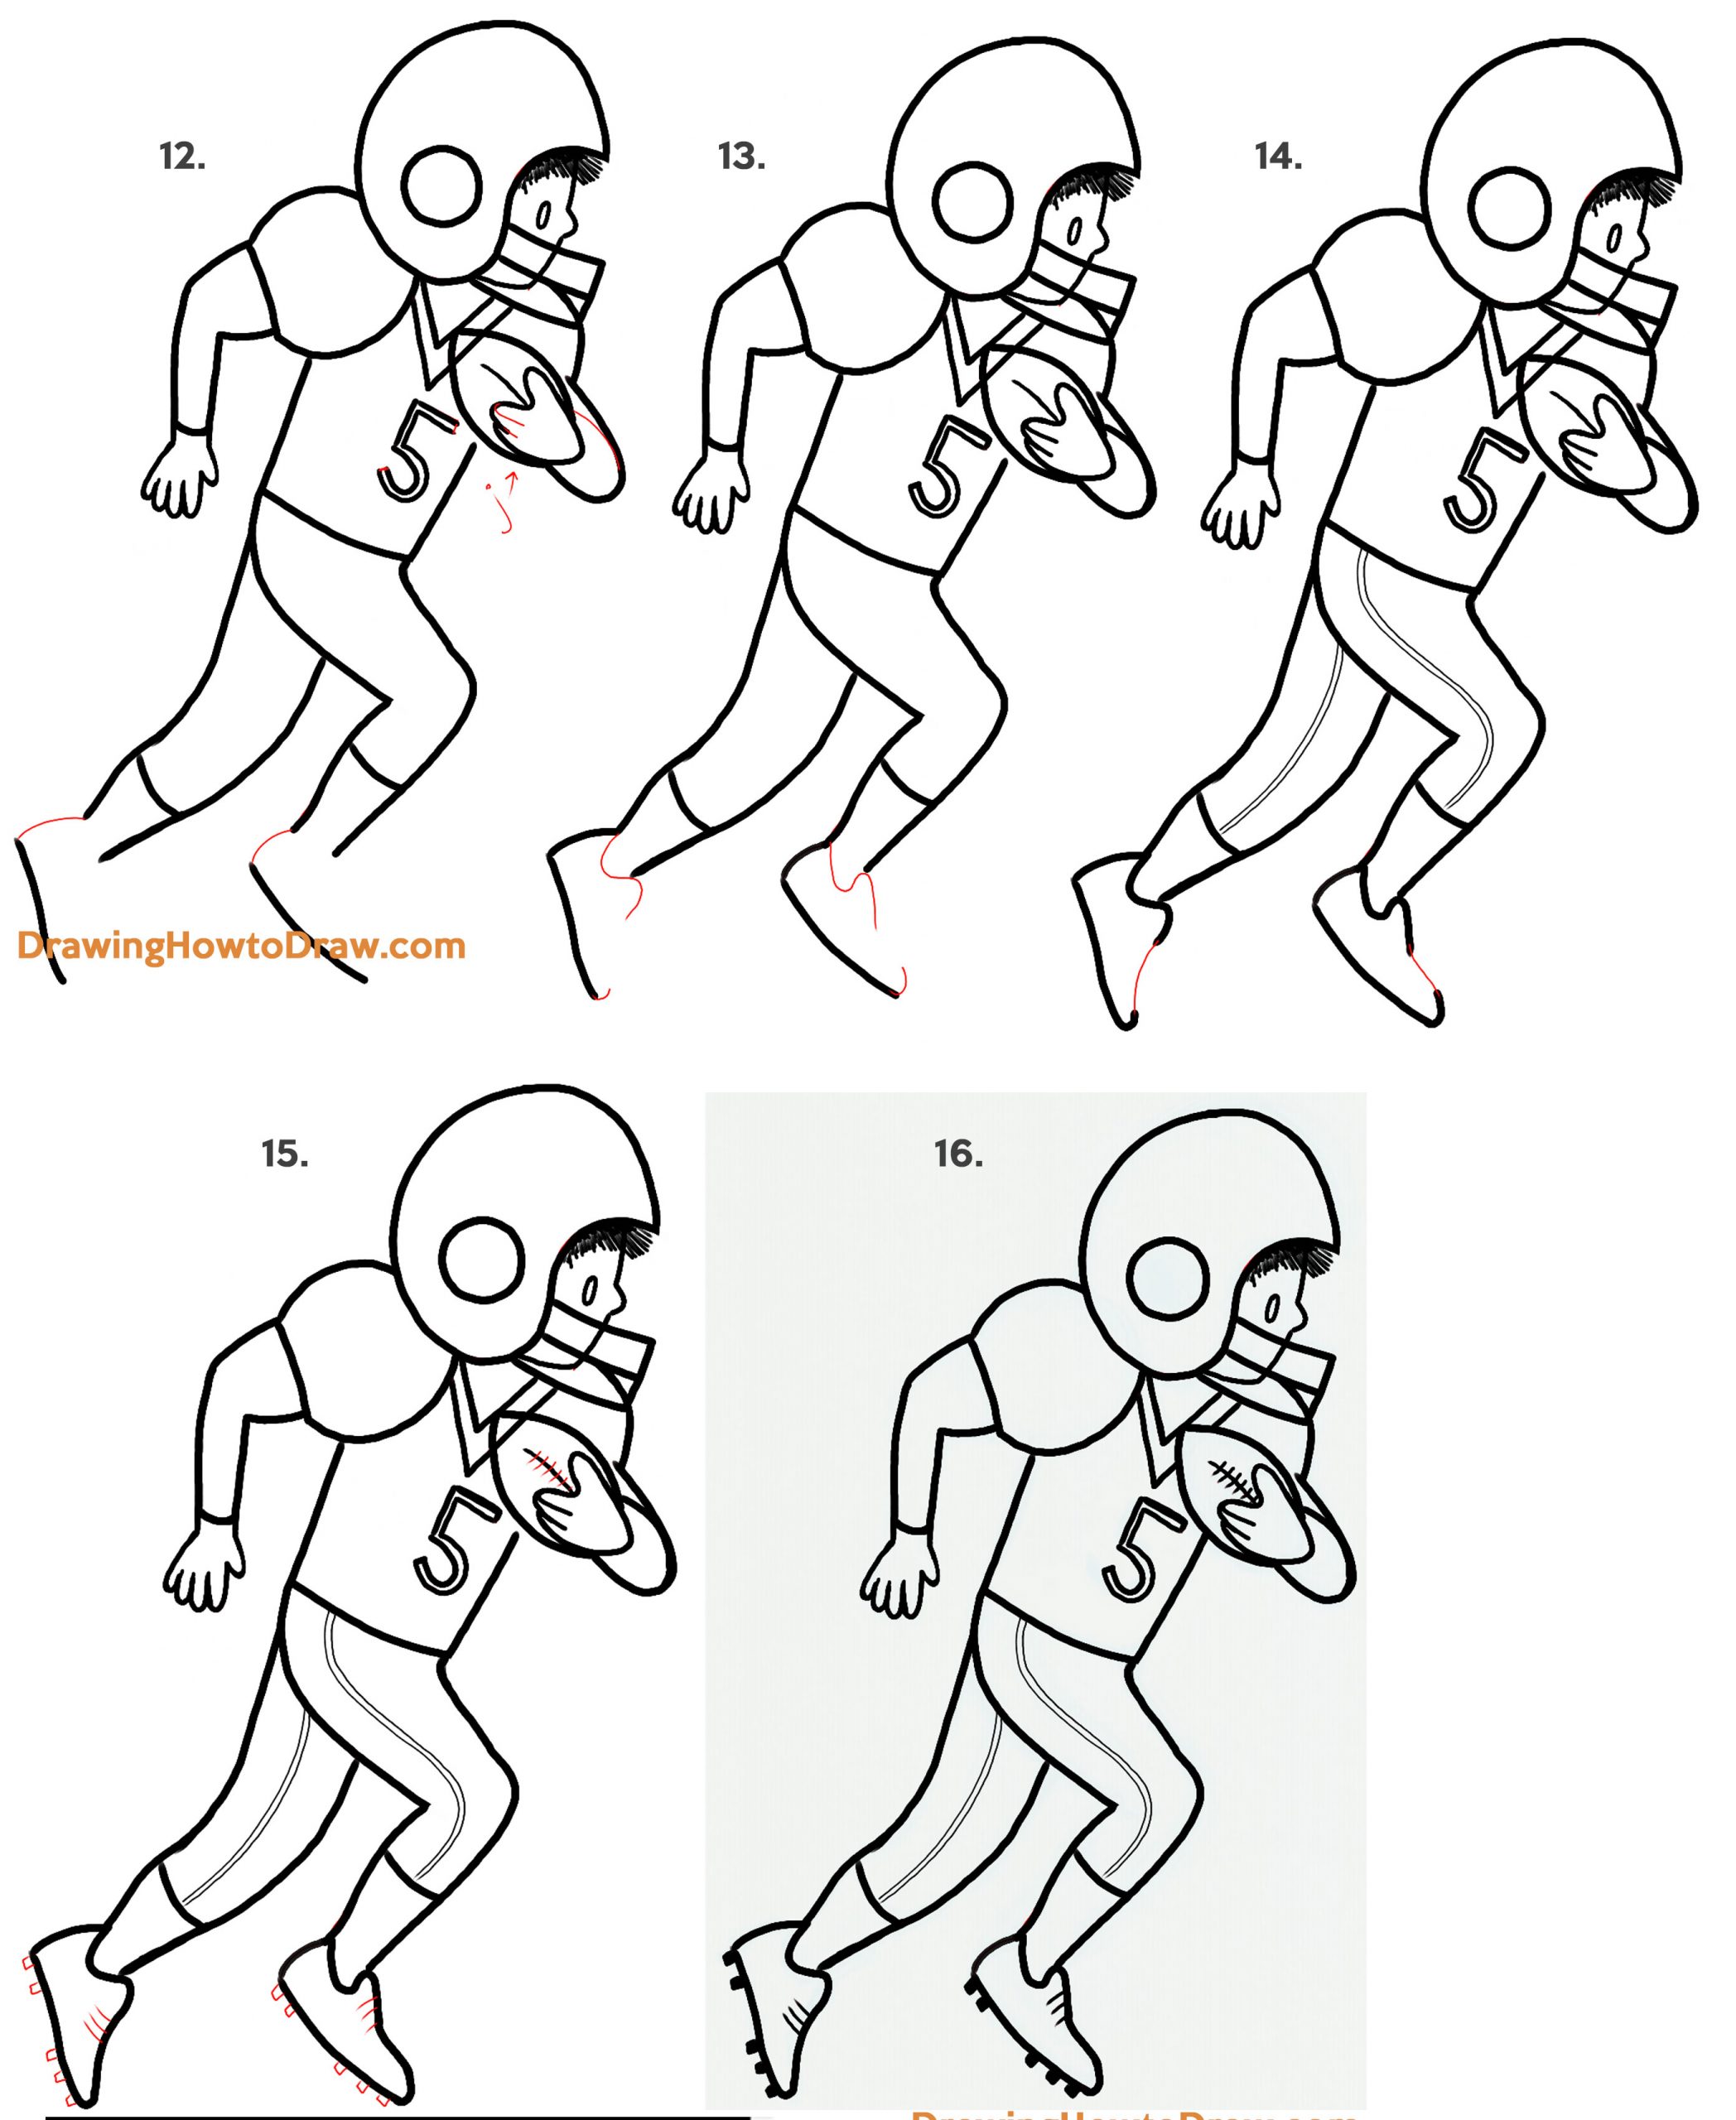 How to Draw a Cartoon American Football Receiver Easy Step by Step